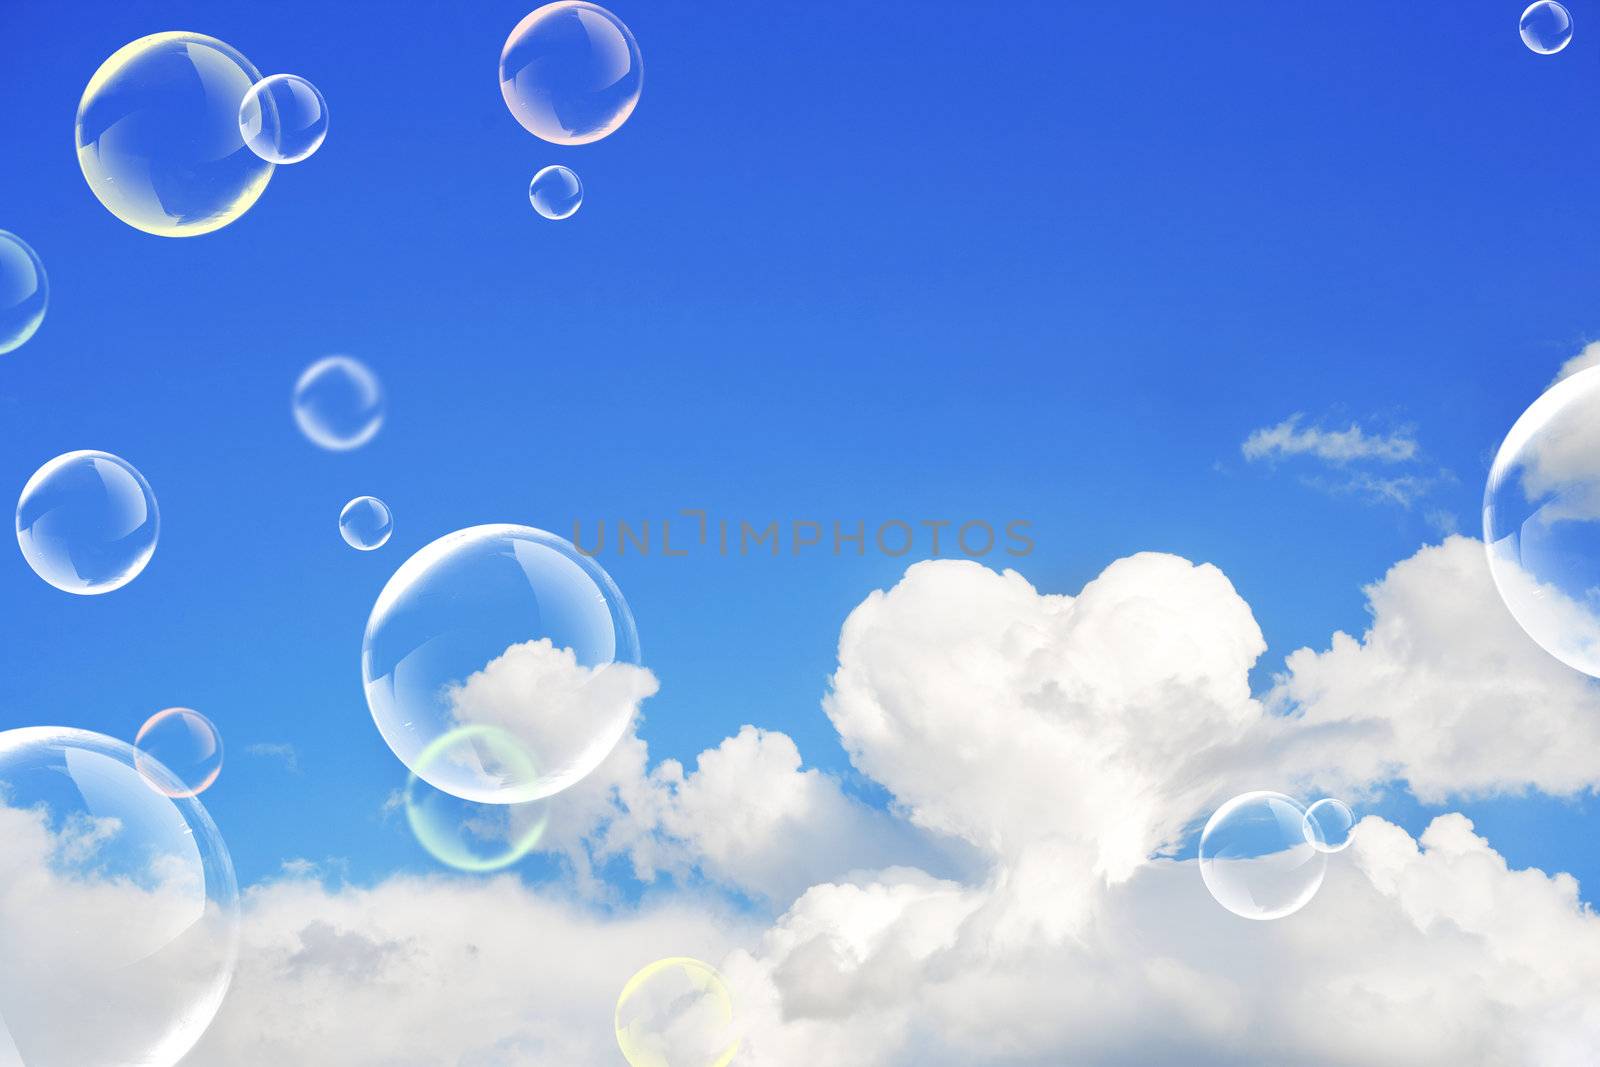 The soap bubbles. White cloud in the light-blue sky